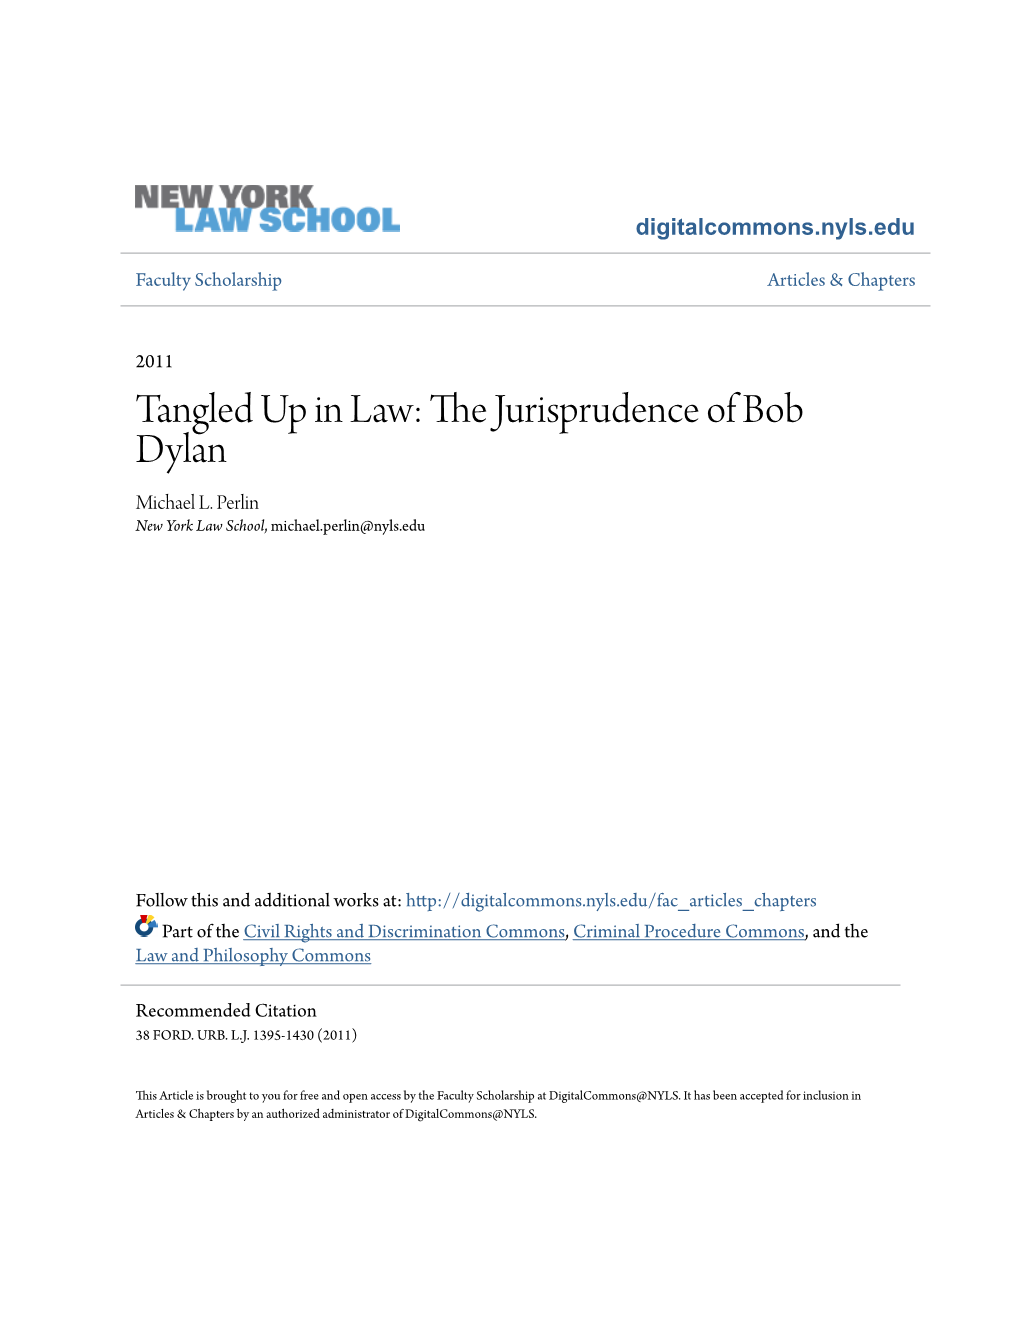 Tangled up in Law: the Jurisprudence of Bob Dylan